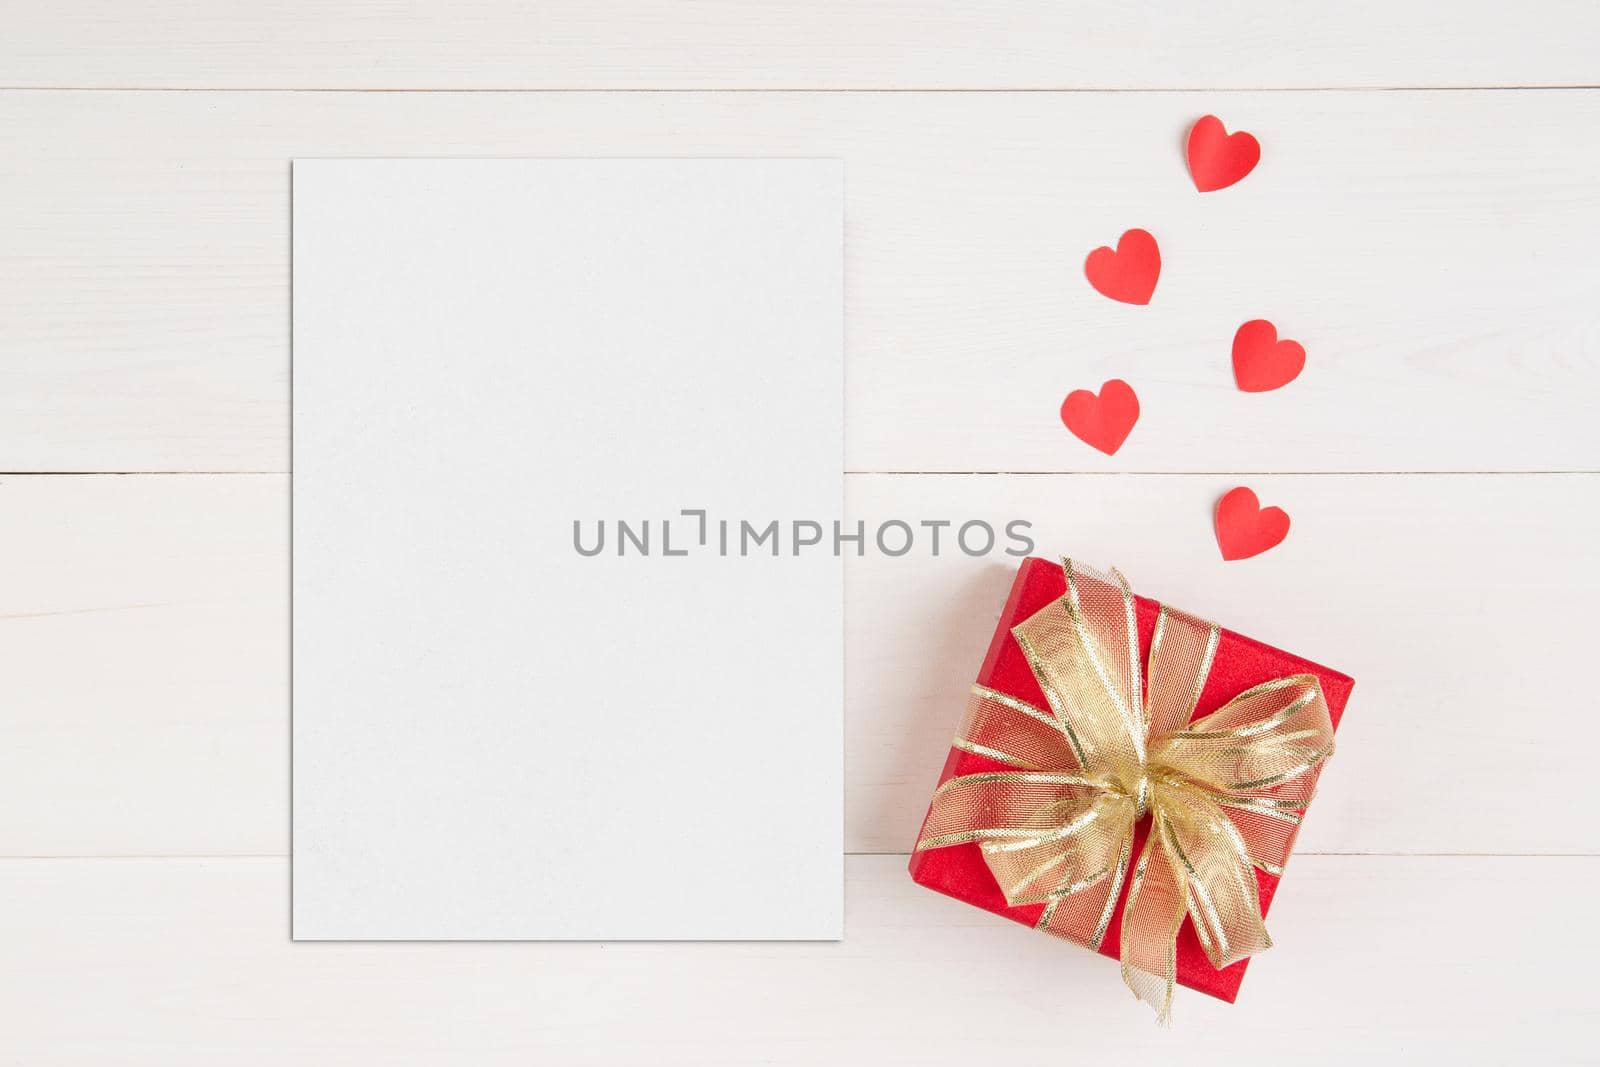 Blank postcard size a5 and letter and gift box and heart shape on wooden table, mockup greeting card and template, decoration with romantic, celebration Valentine day and holiday concept.